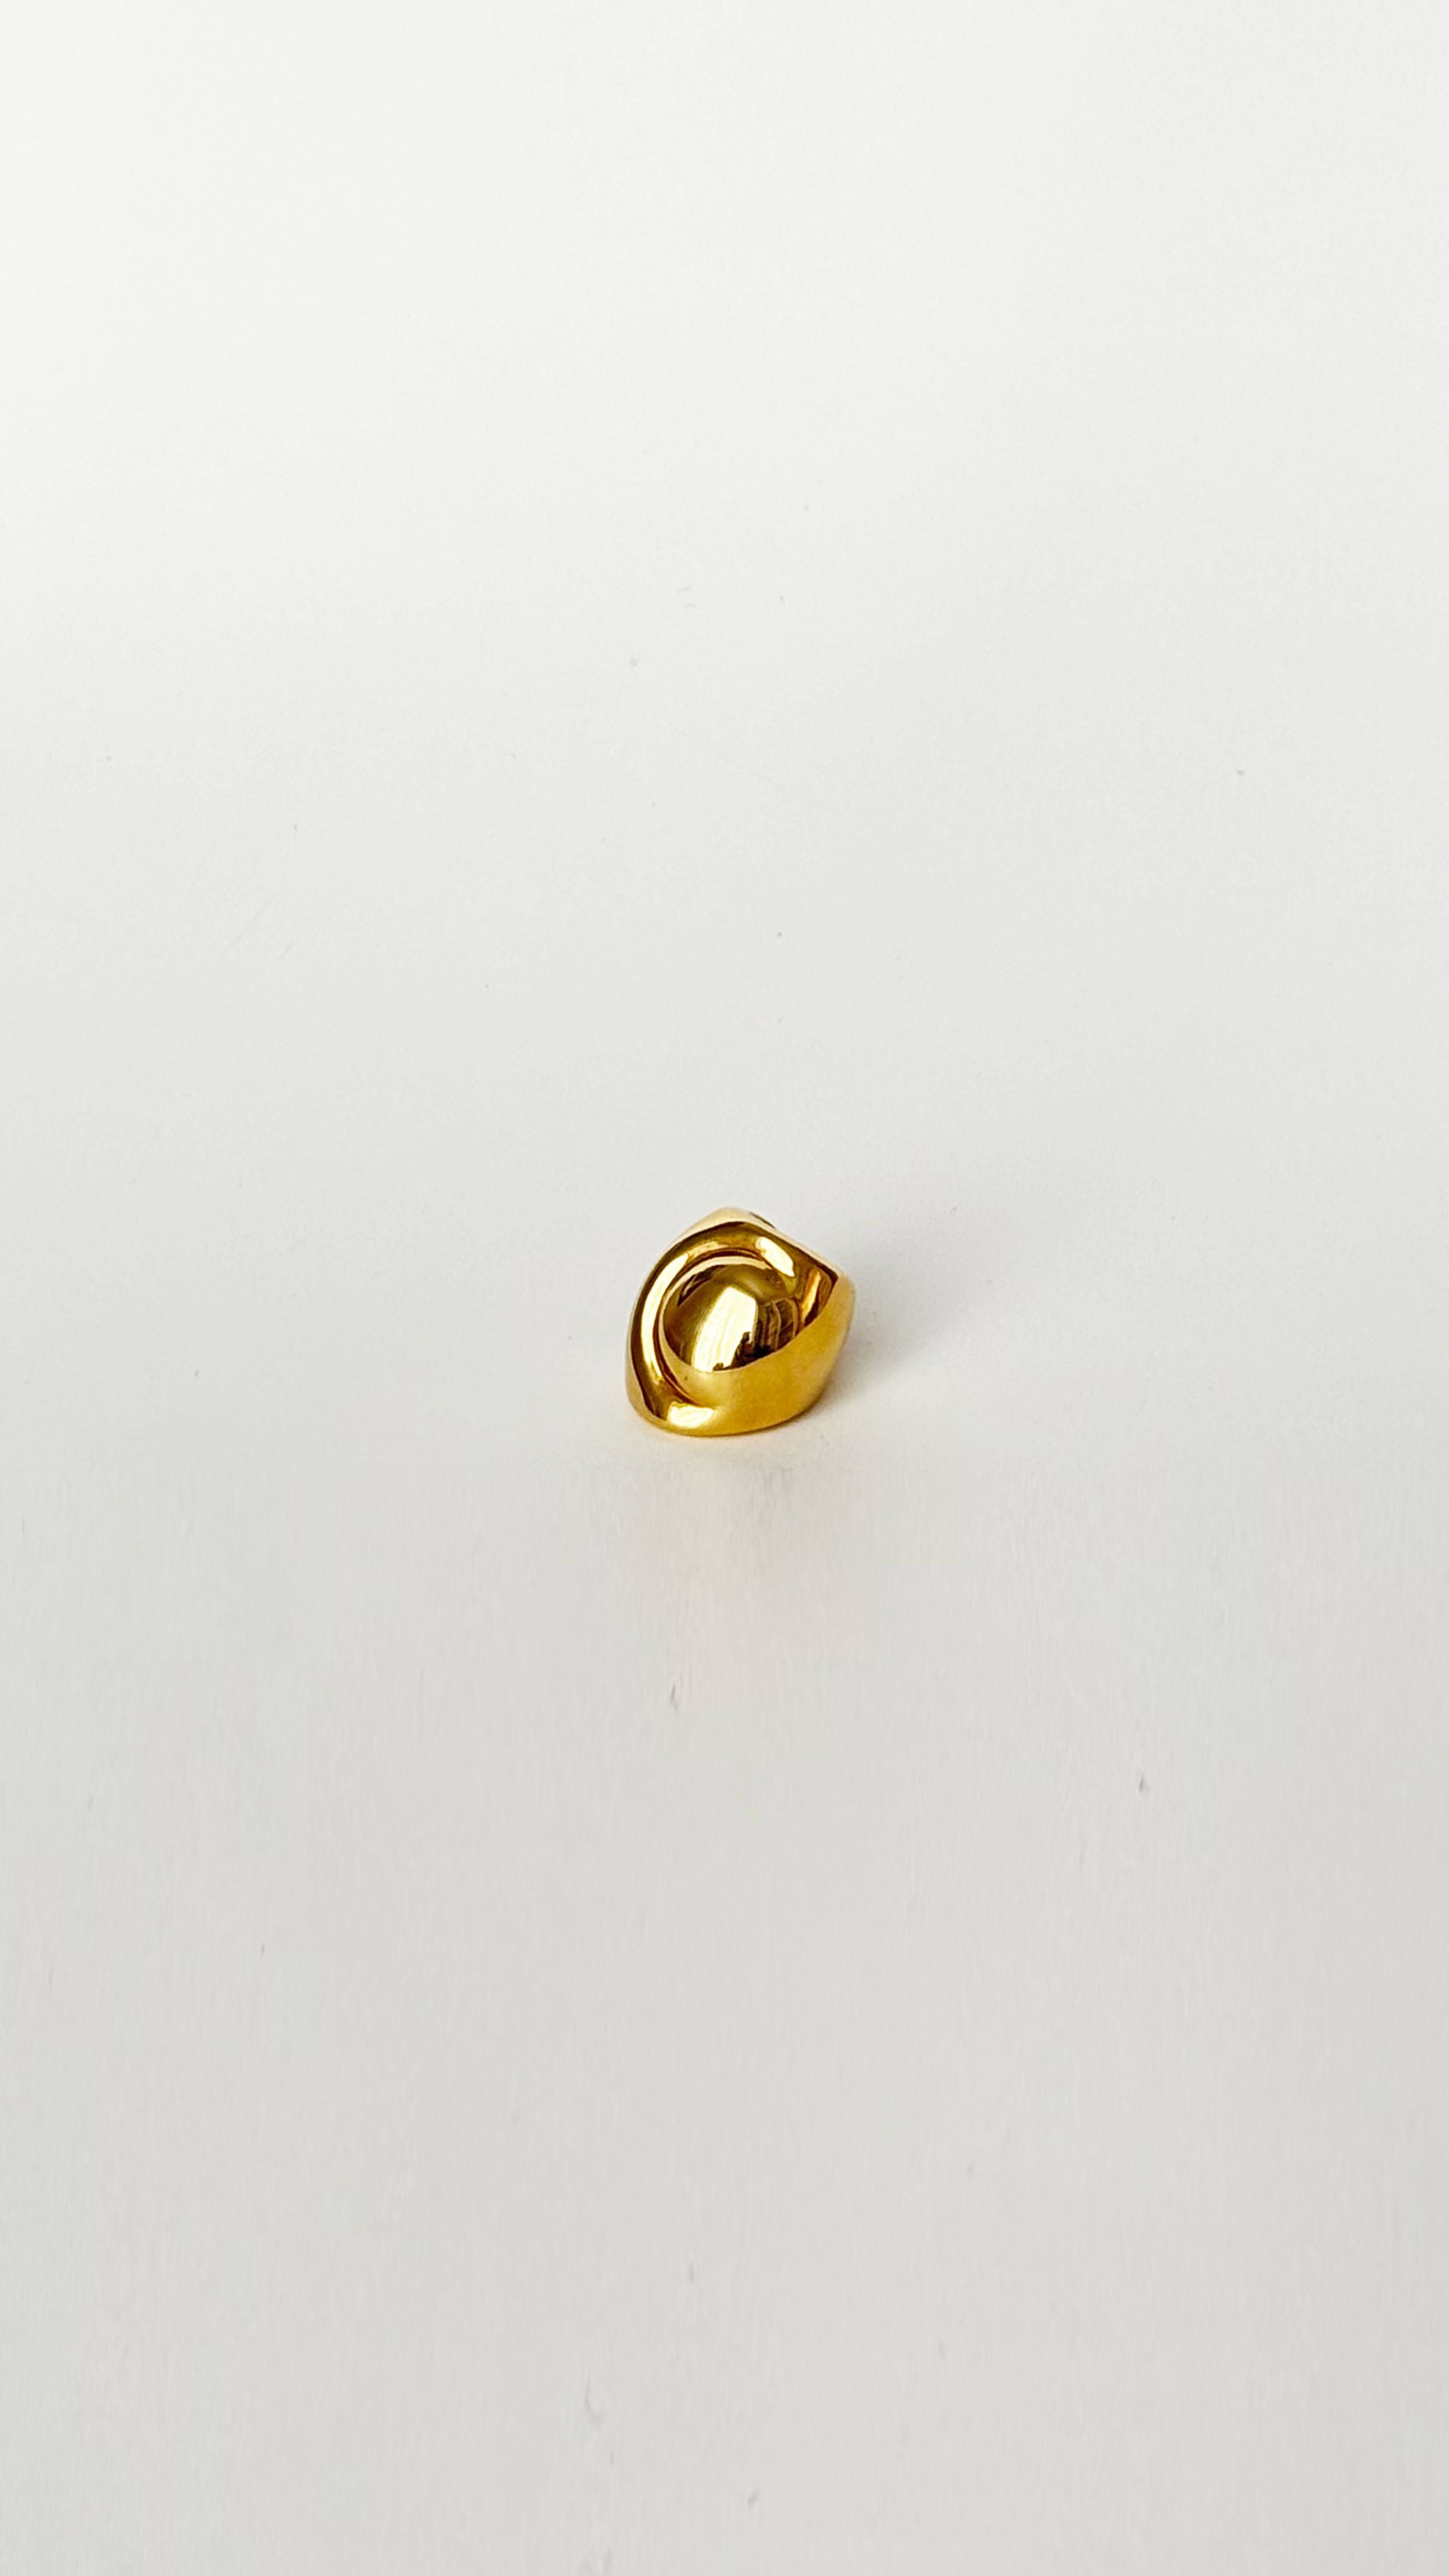 Monica Sordo Cubagua Earcuff Small. Handmade in Peru, sustainable jewelry. Photo of the 24K gold plated ear cuff from the front.